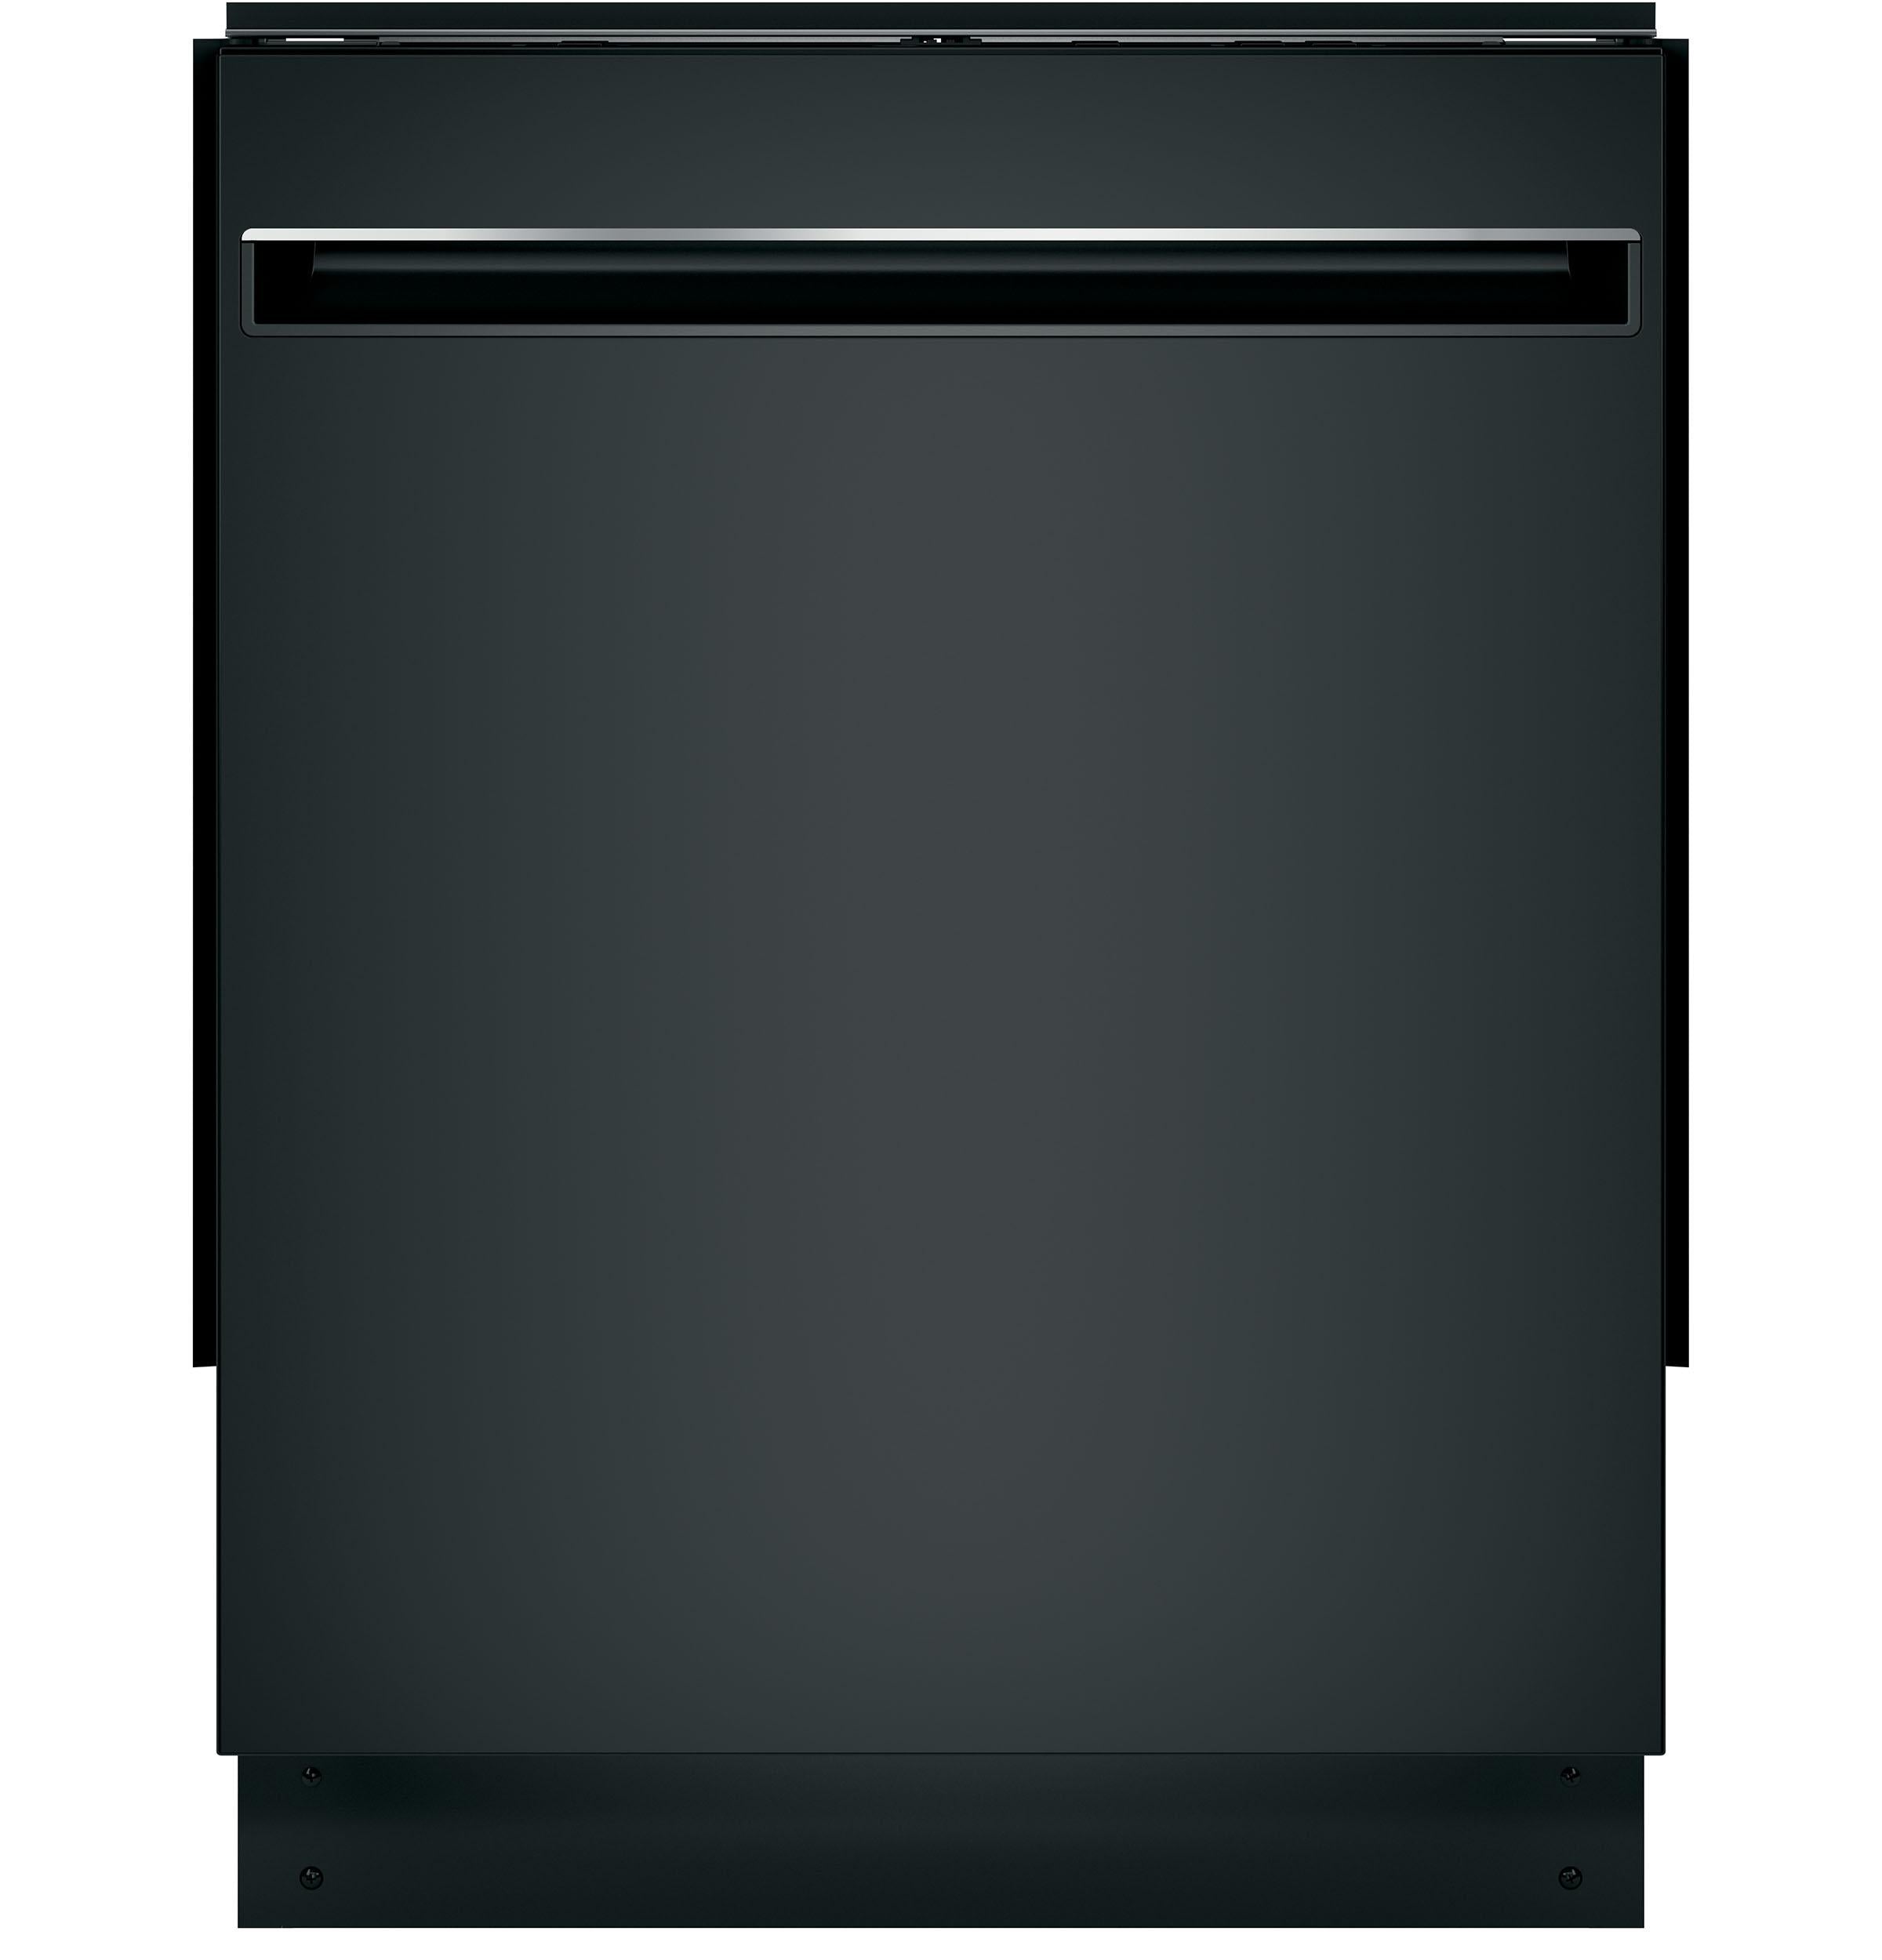 GE® ENERGY STAR® ADA Compliant Stainless Steel Interior Dishwasher with Sanitize Cycle